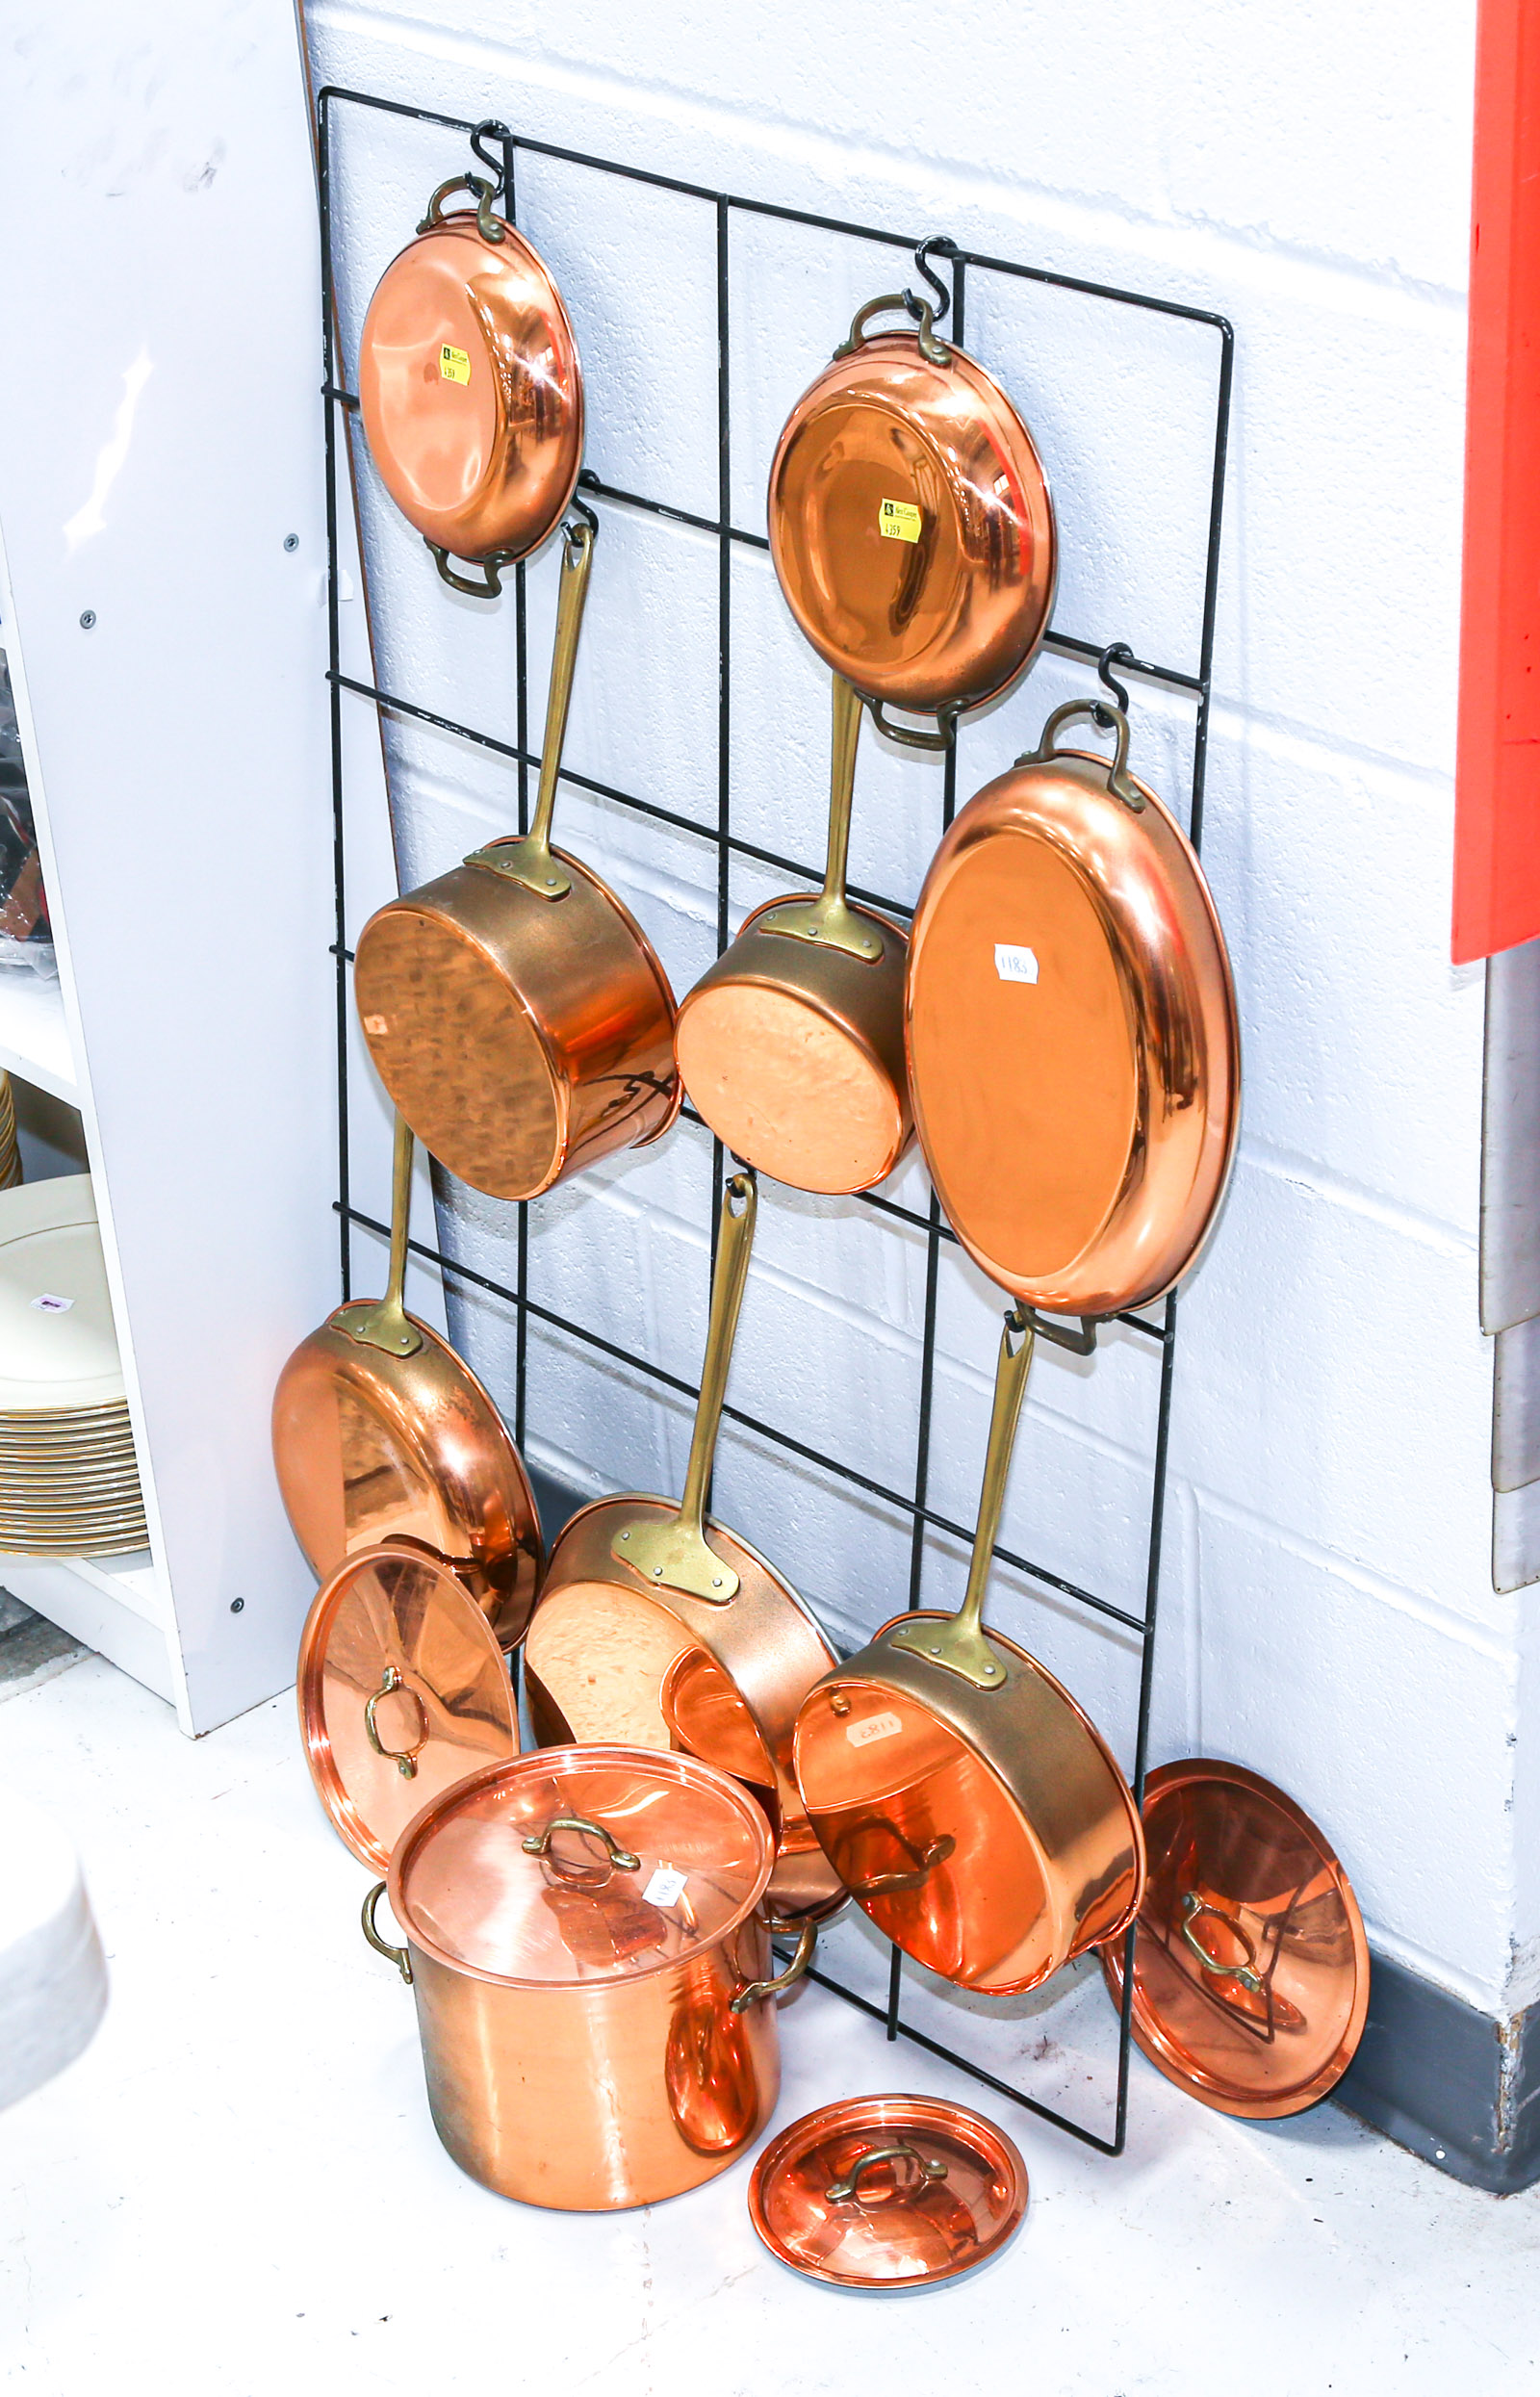 NINE COPPER COOKING POTS WITH IRON